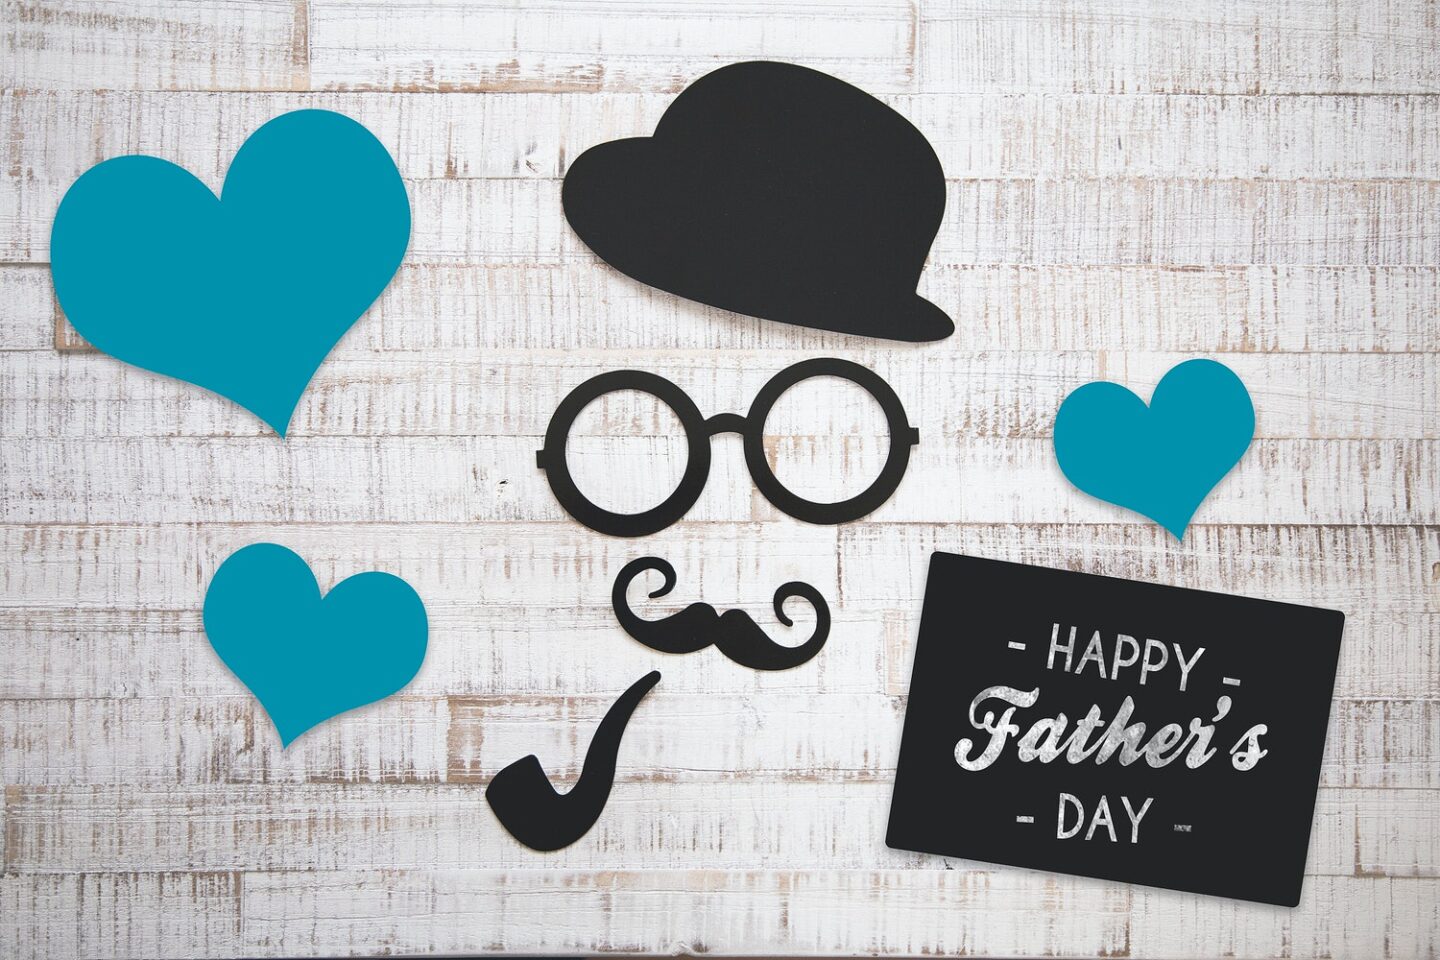 Showing Some Love and Care: Gift Ideas For Father’s Day